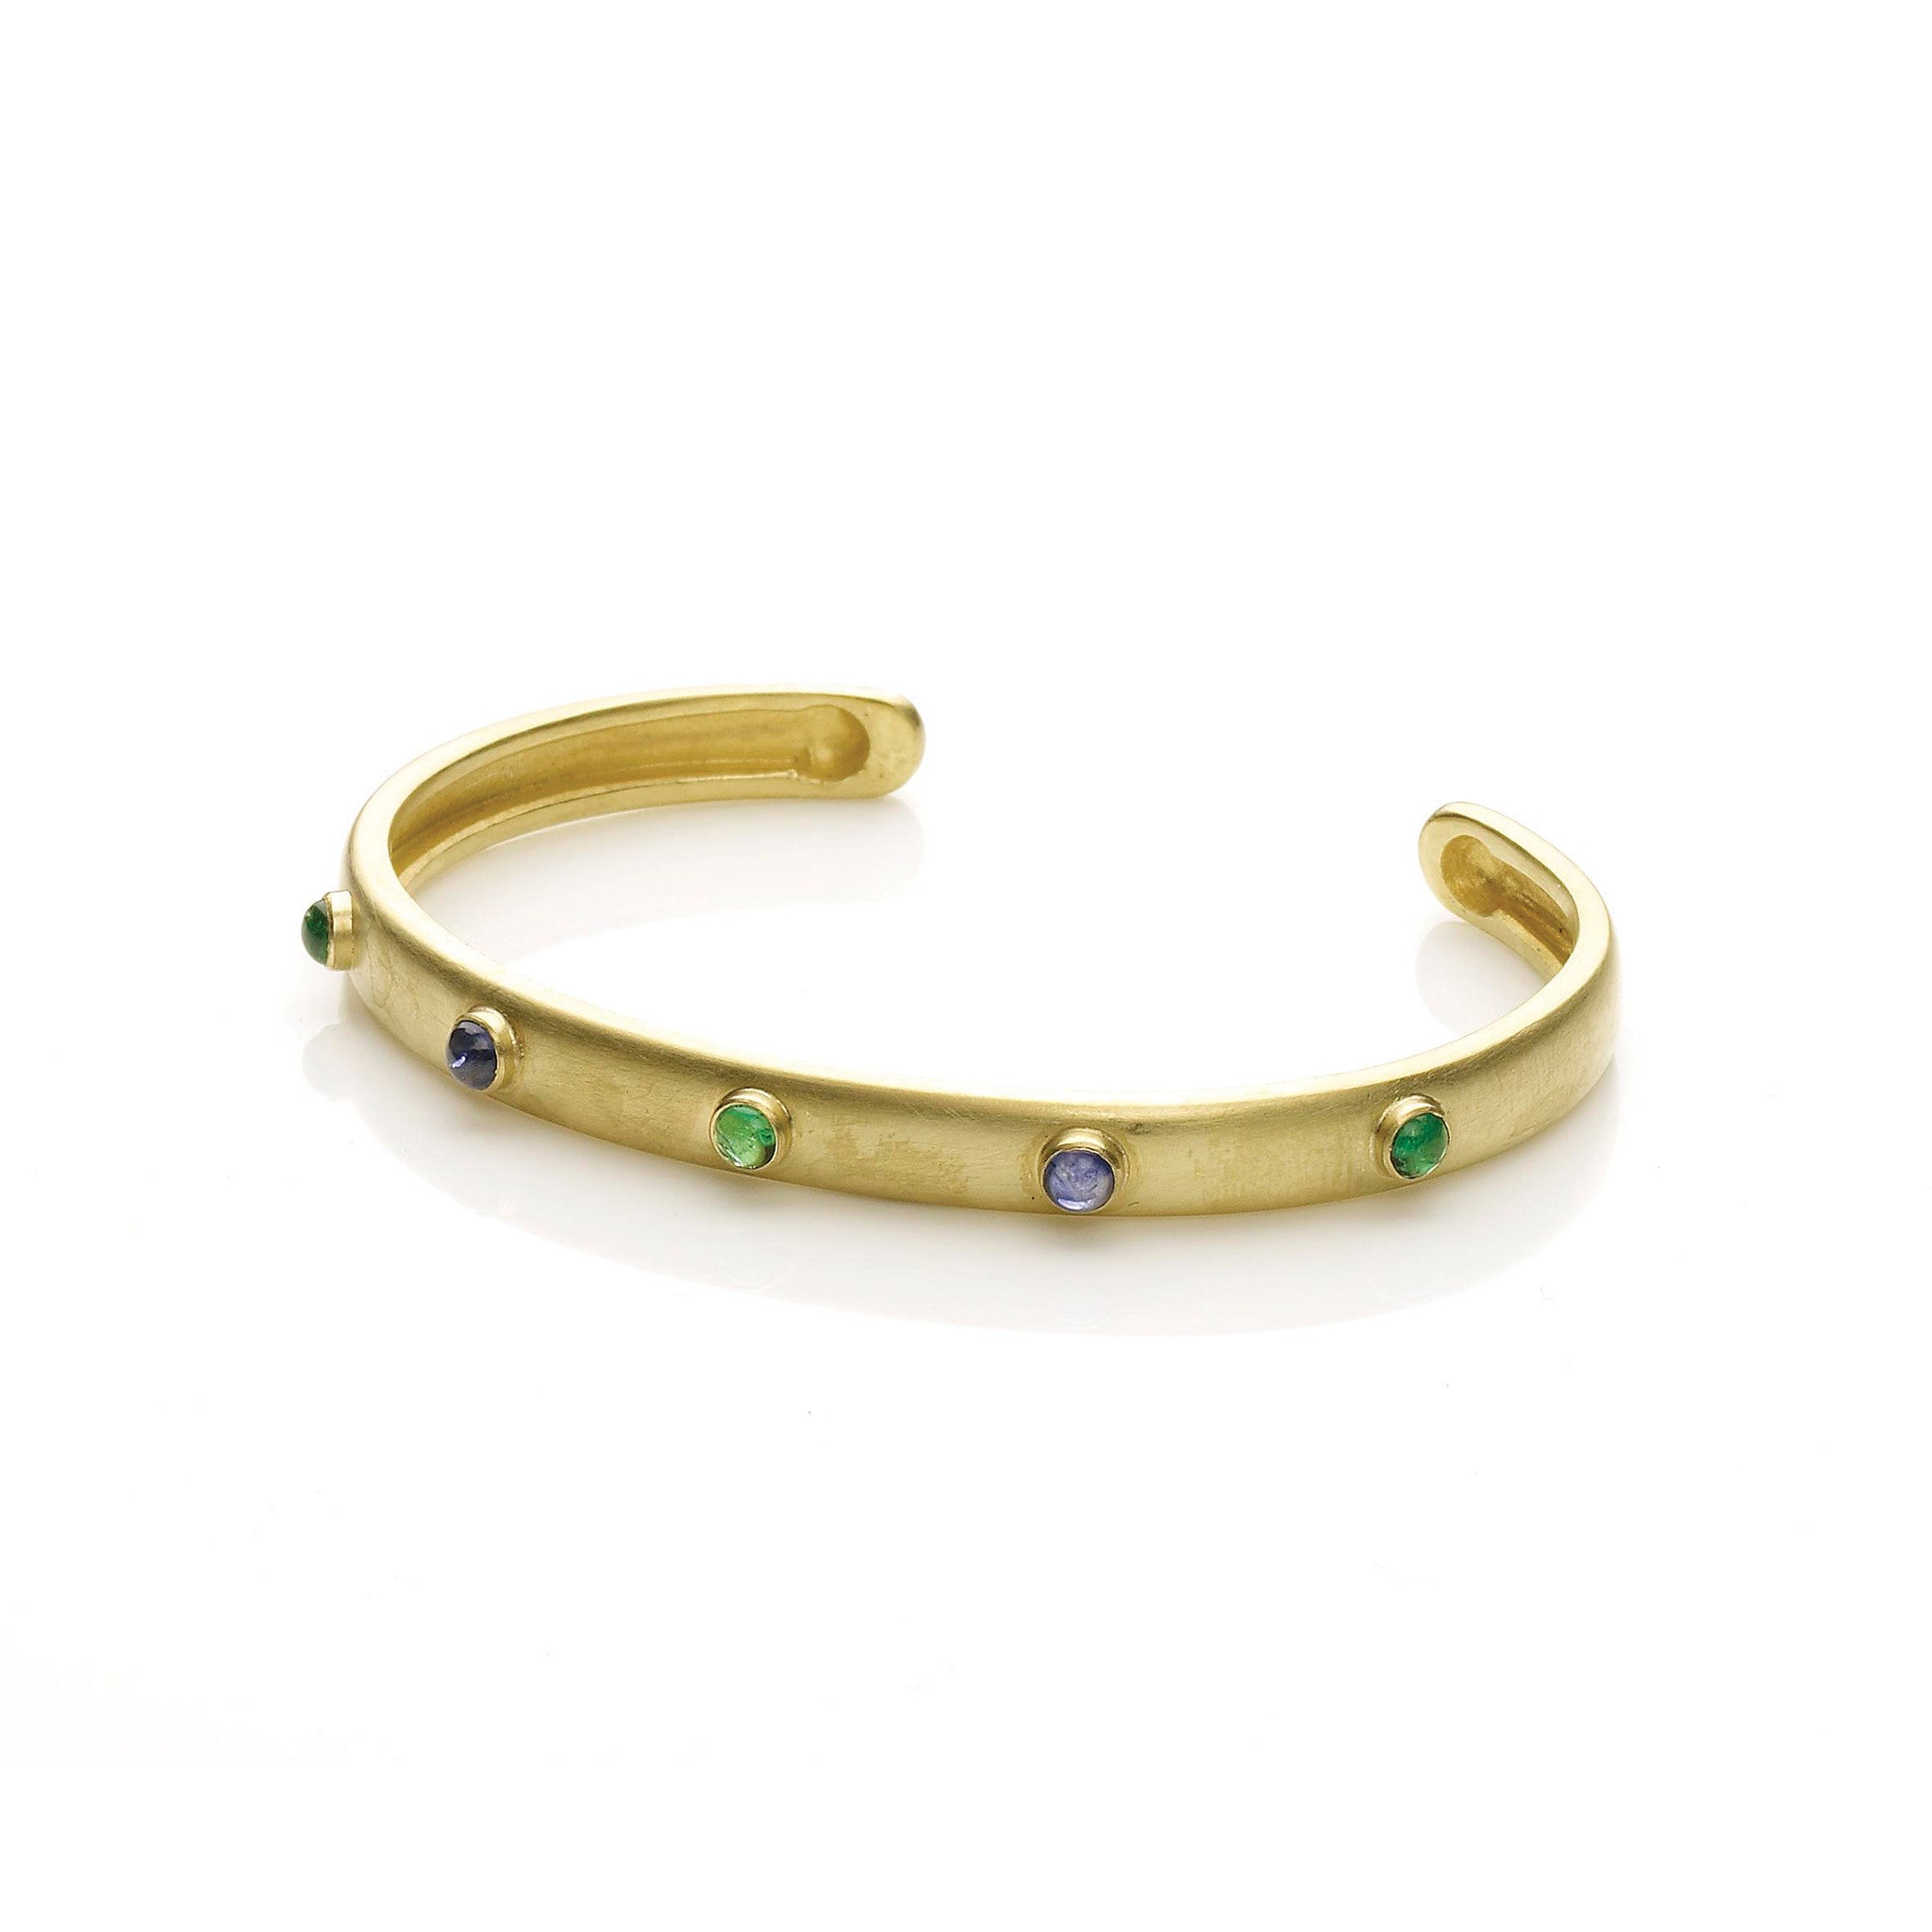 Oval yellow gold slip on bangle set with emeralds and sapphire cabochons on white background